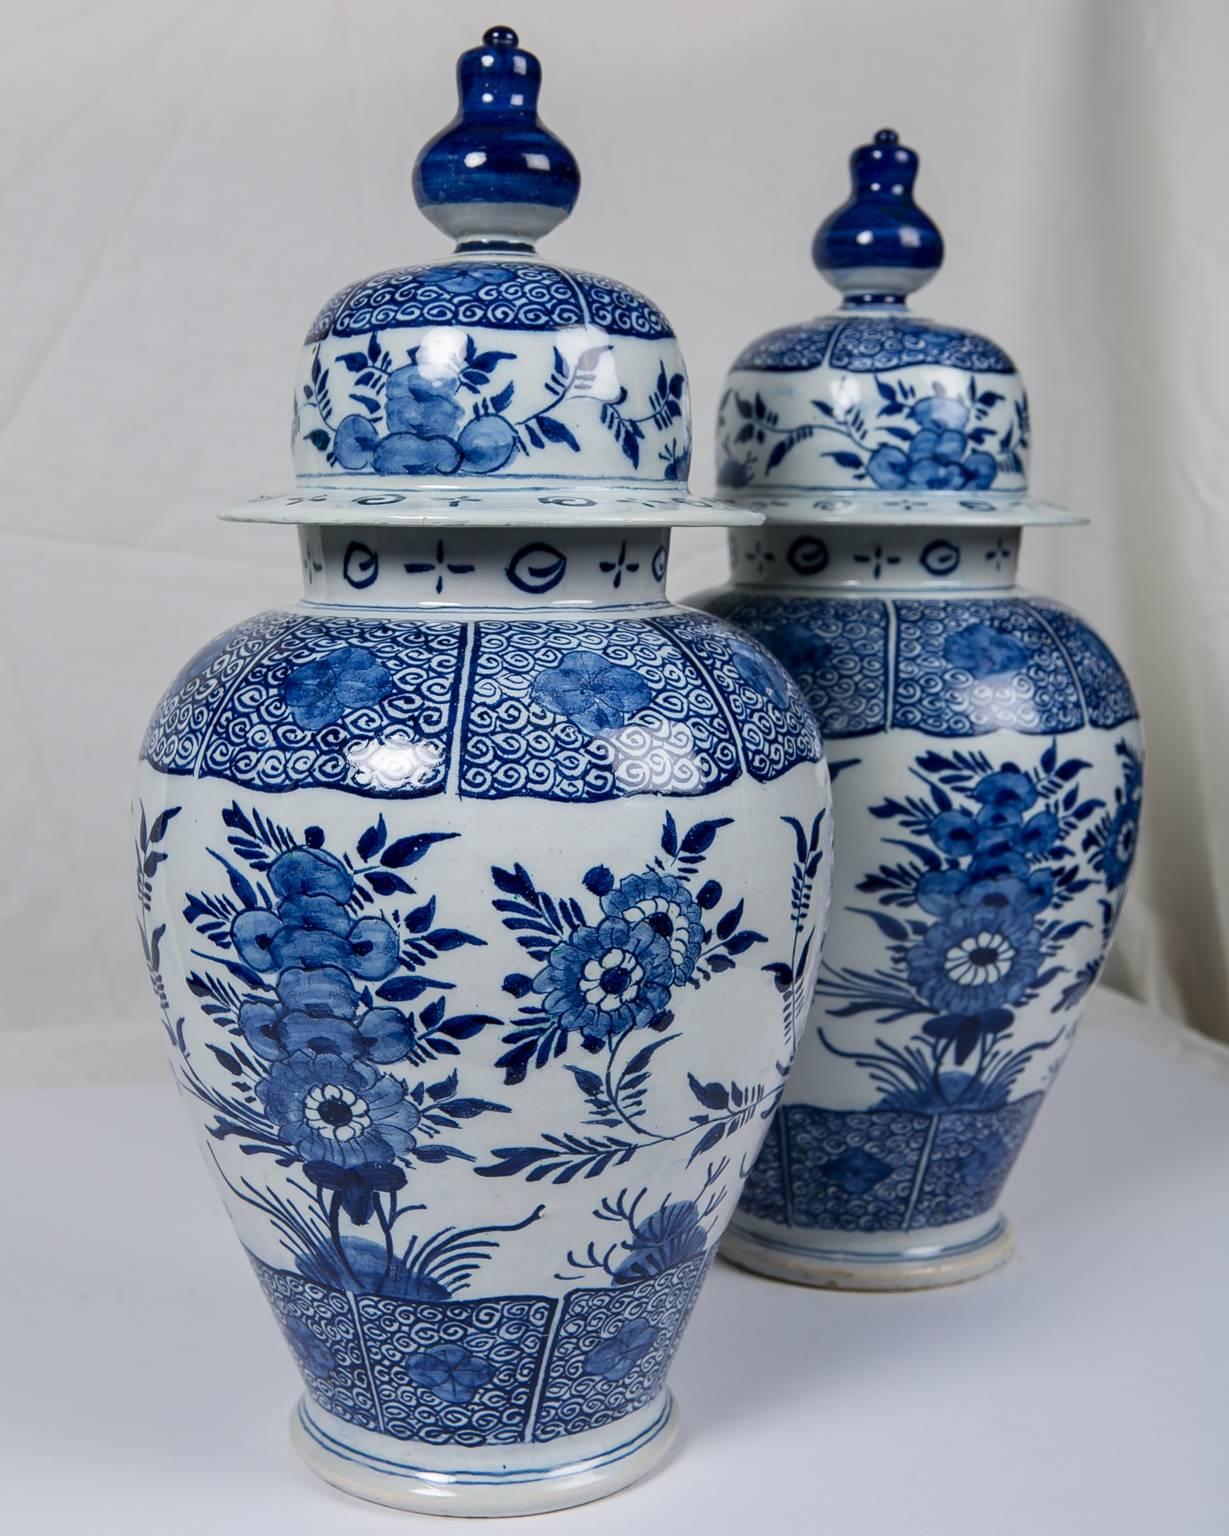 Pair of Dutch Delft blue and white antique ginger jars painted in a deep cobalt blue.
The jars are decorated all around with sprays of chrysanthemums. The tops, shoulders, and bases are painted with scrolling vines and flower heads.
Made in The